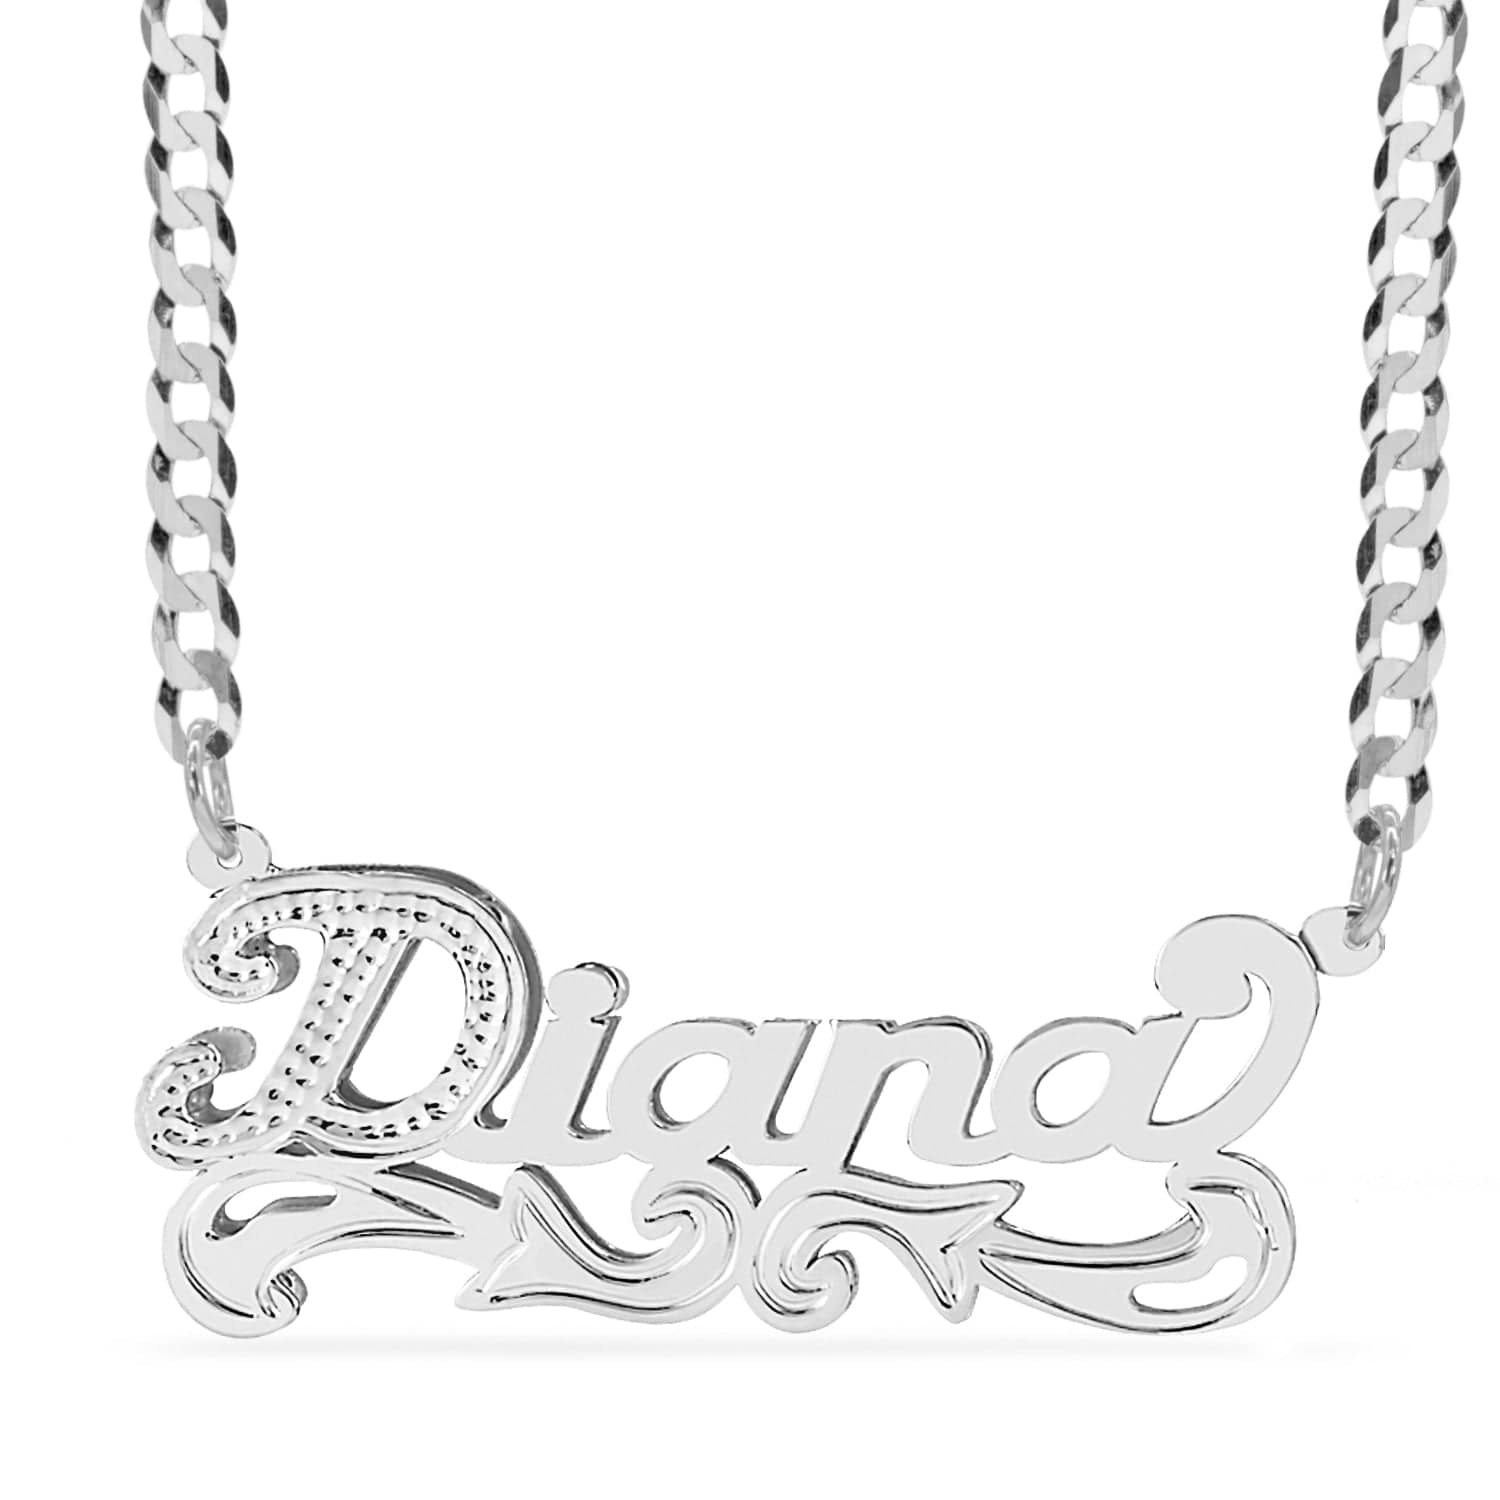 Two-Tone. Sterling Silver / Cuban Chain Double Plated Nameplate Necklace "Diana" with Cuban chain